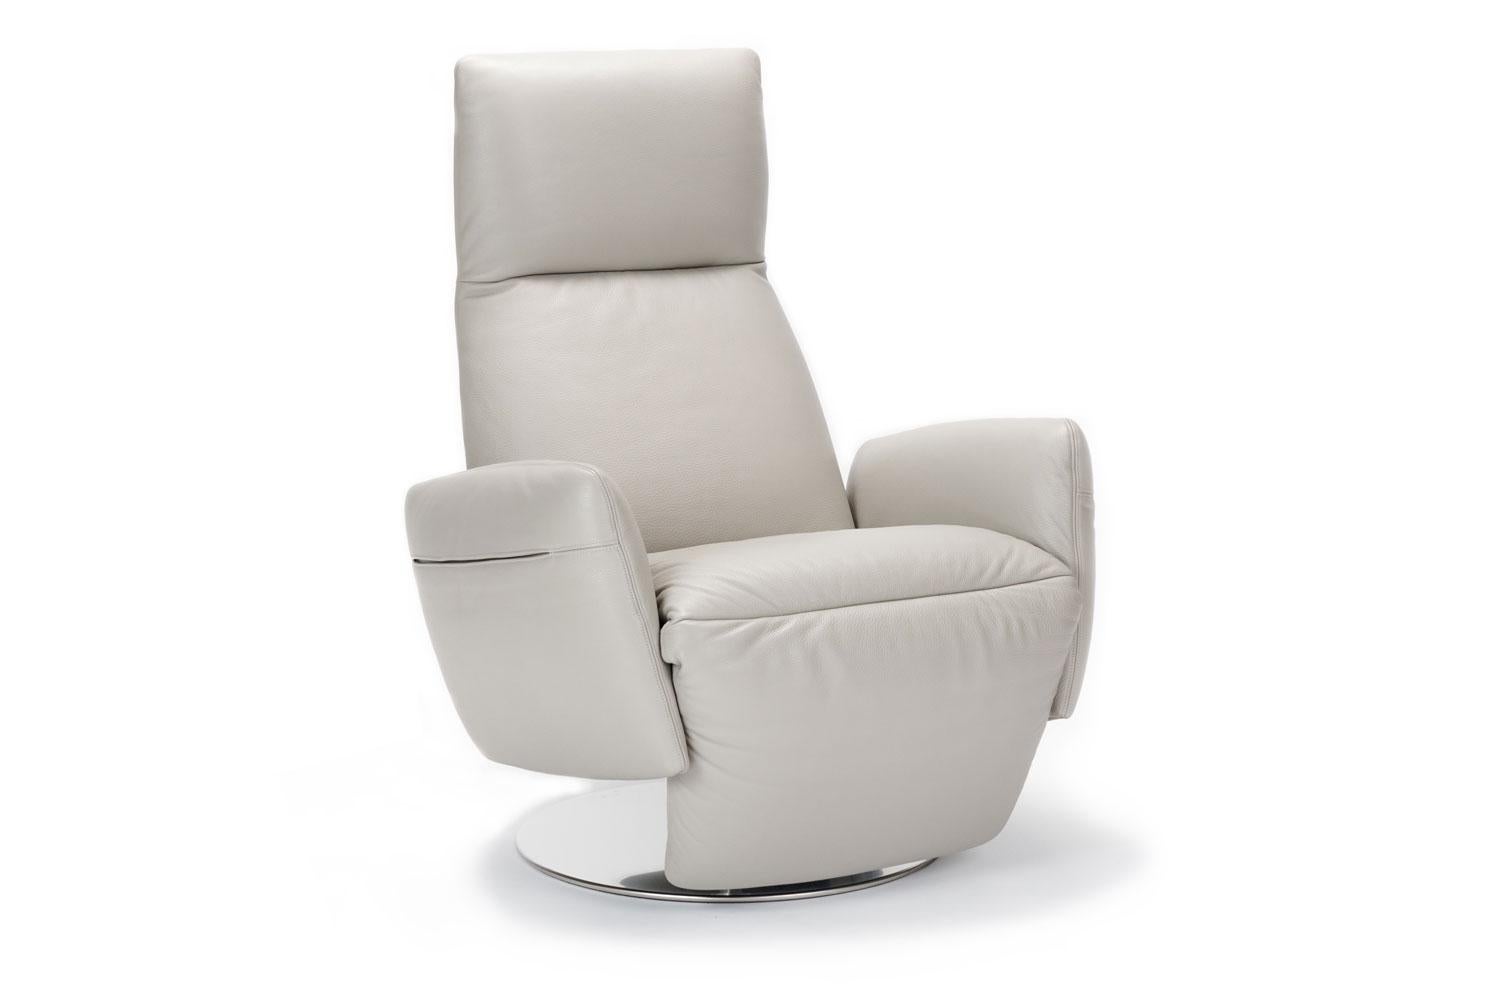 The pillow armchair designed by Poltrona Frau R. & D. is the most complete aesthetic and functional expression of the reclinable seat.
It is completely covered in soft leather upholstery and the headrest, backrest and footrest are adjustable for